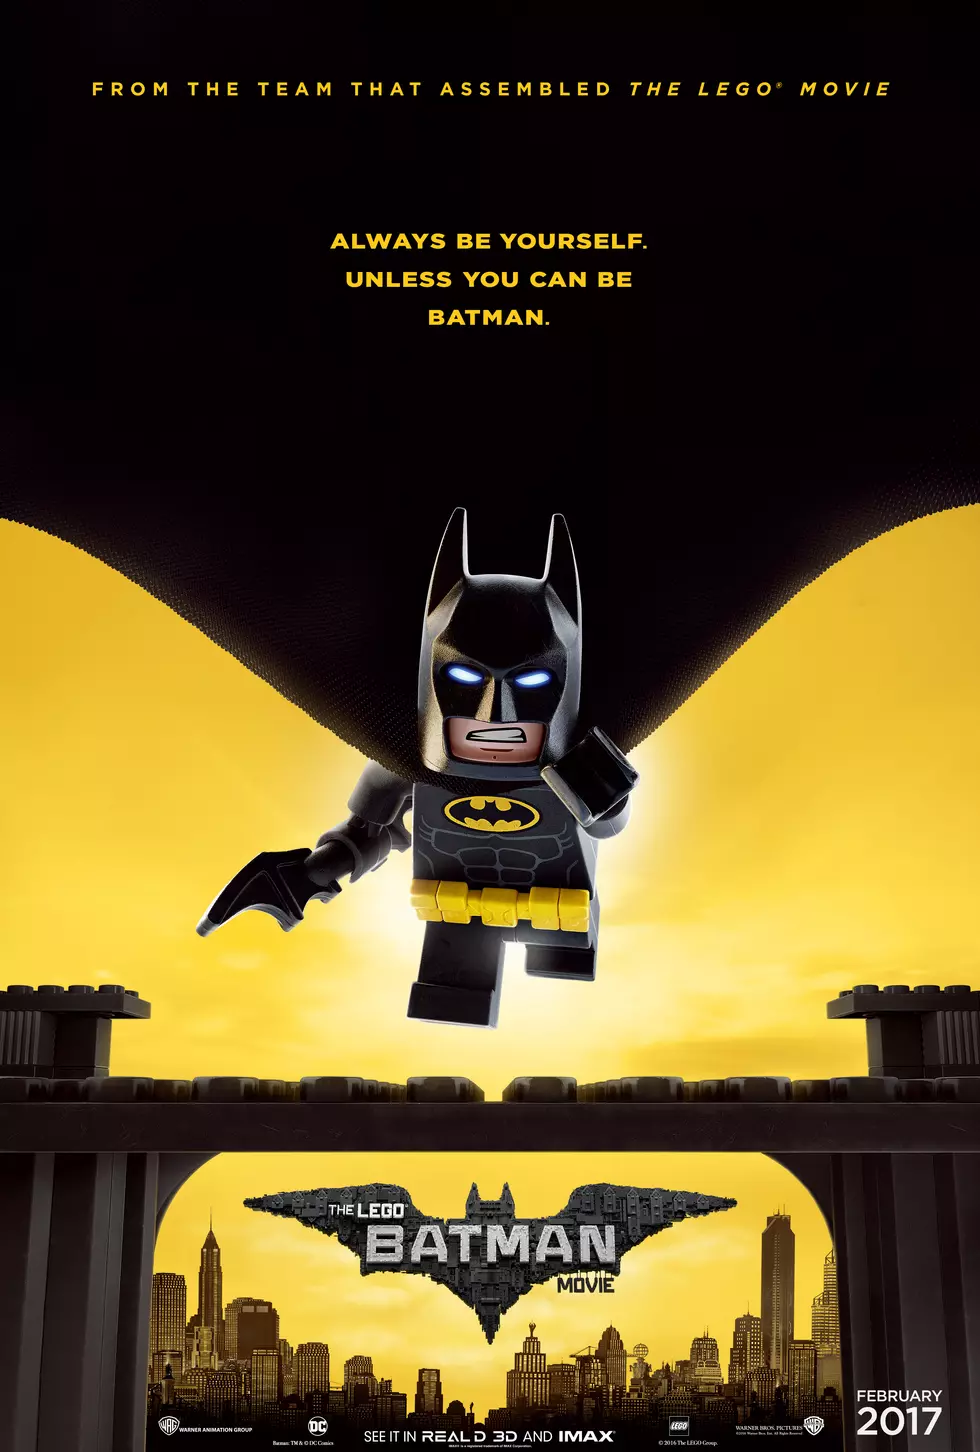 Celebrate ‘Batman Day’ With a ‘The LEGO Batman Movie’ Poster